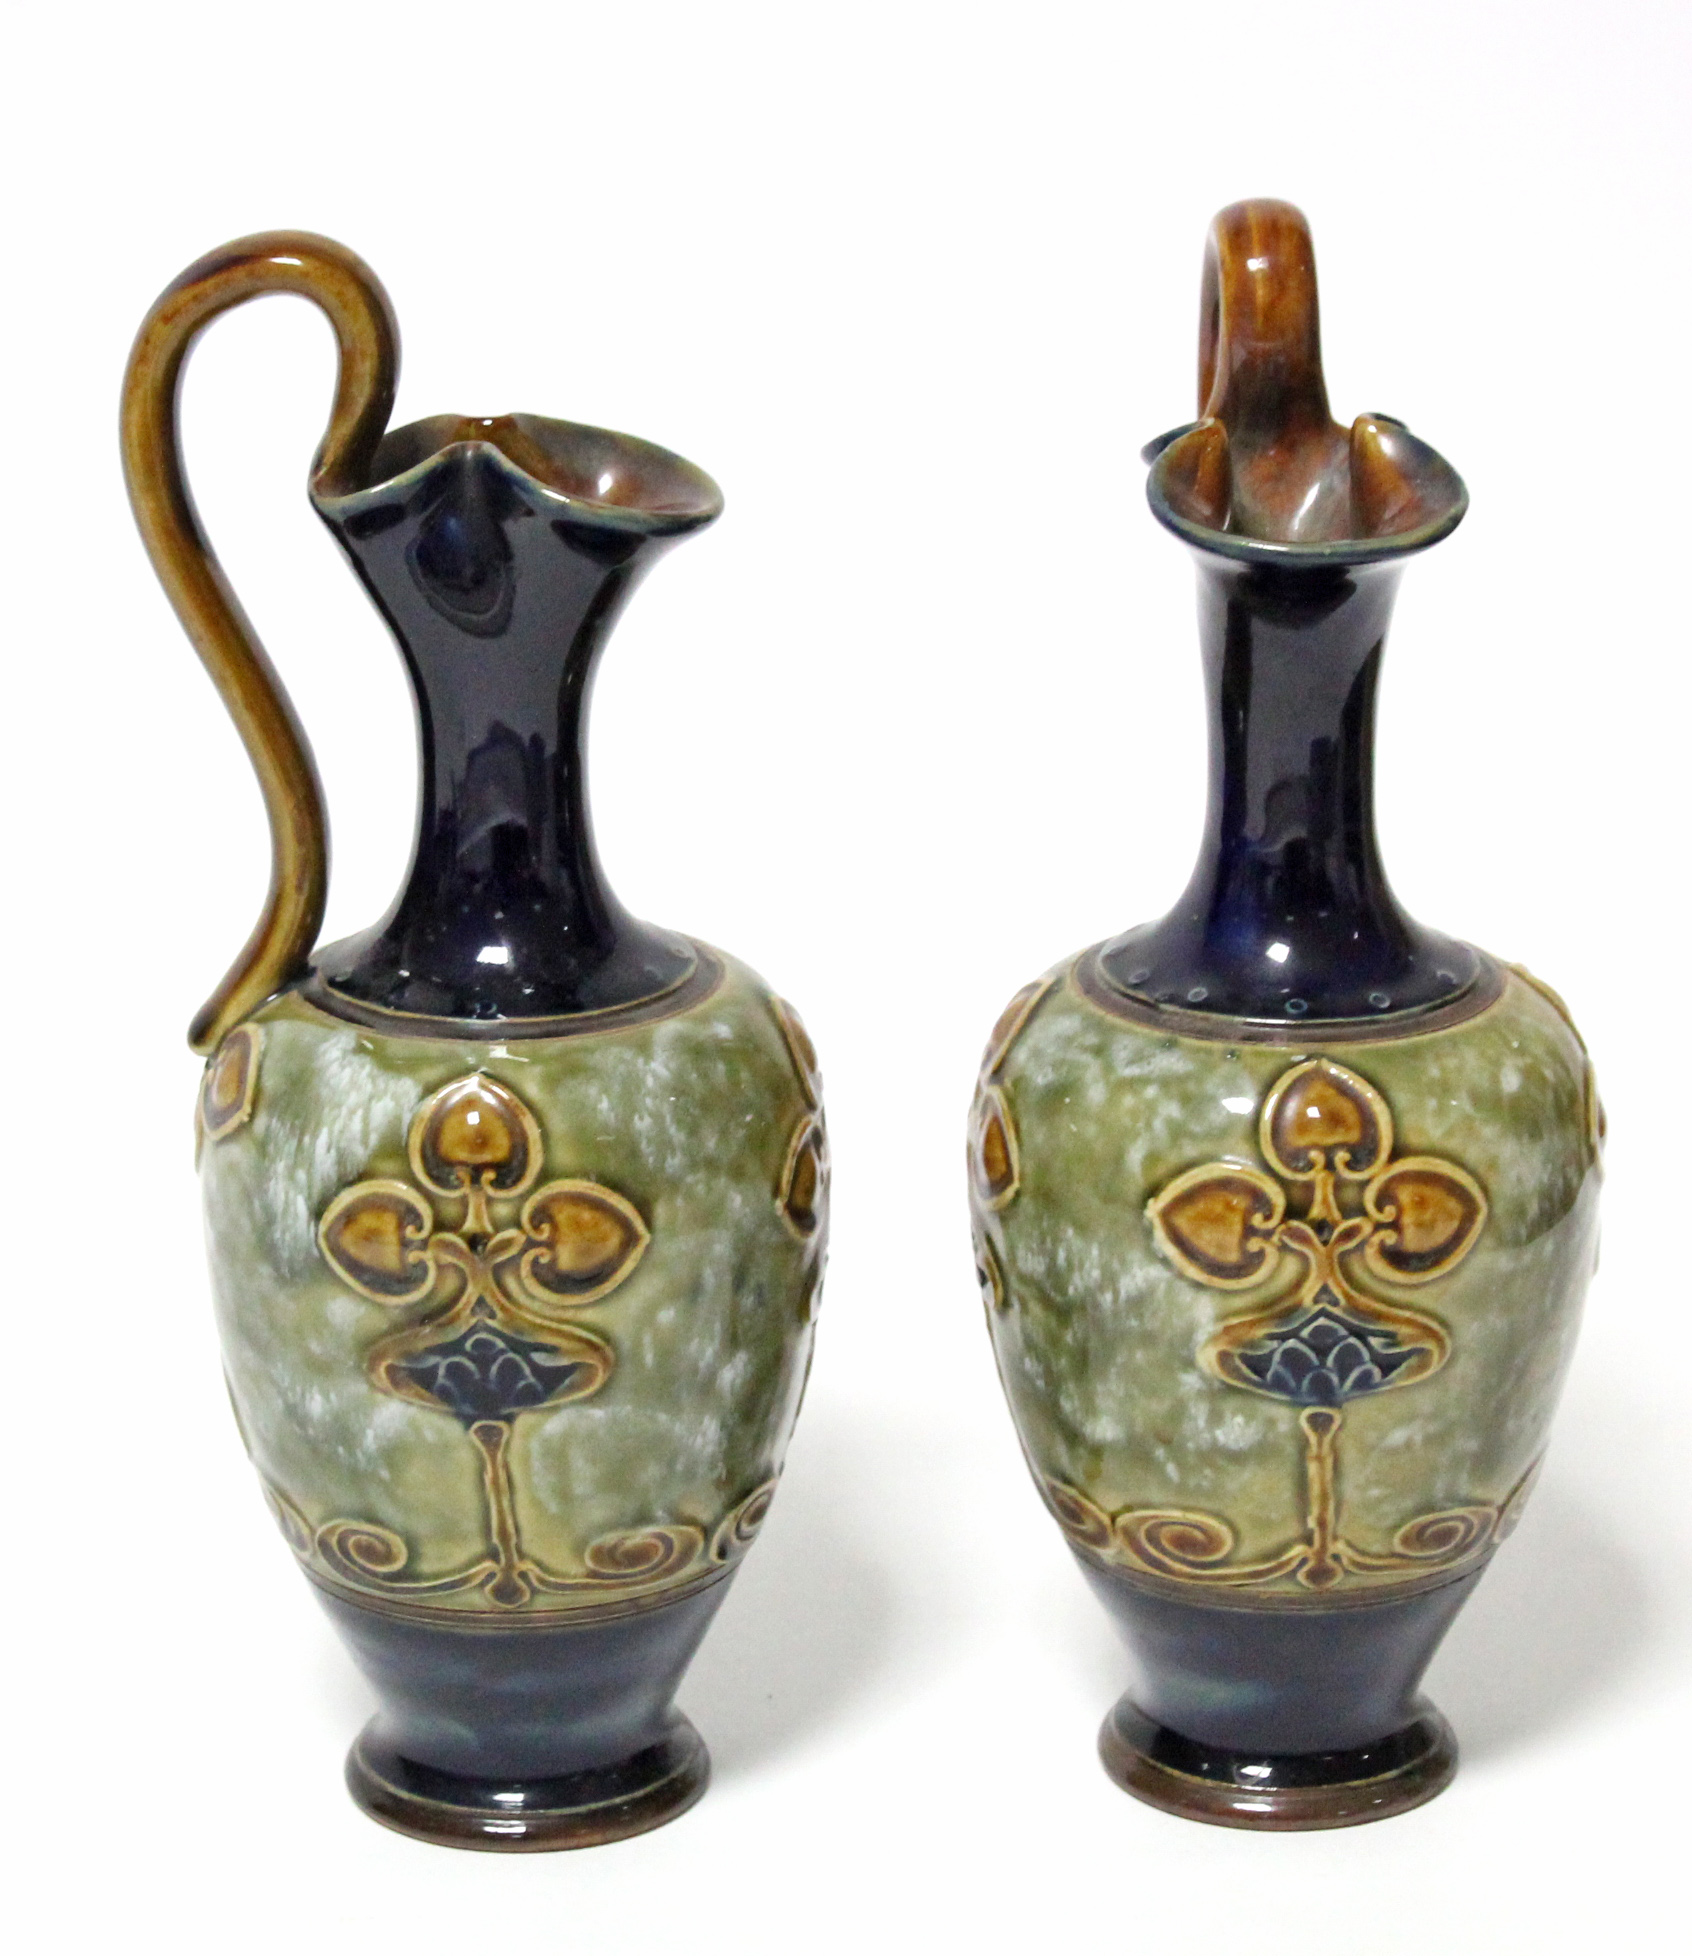 A pair of Royal Doulton stoneware ewers with art nouveau stylised floral motifs; 9½” high. - Image 2 of 3